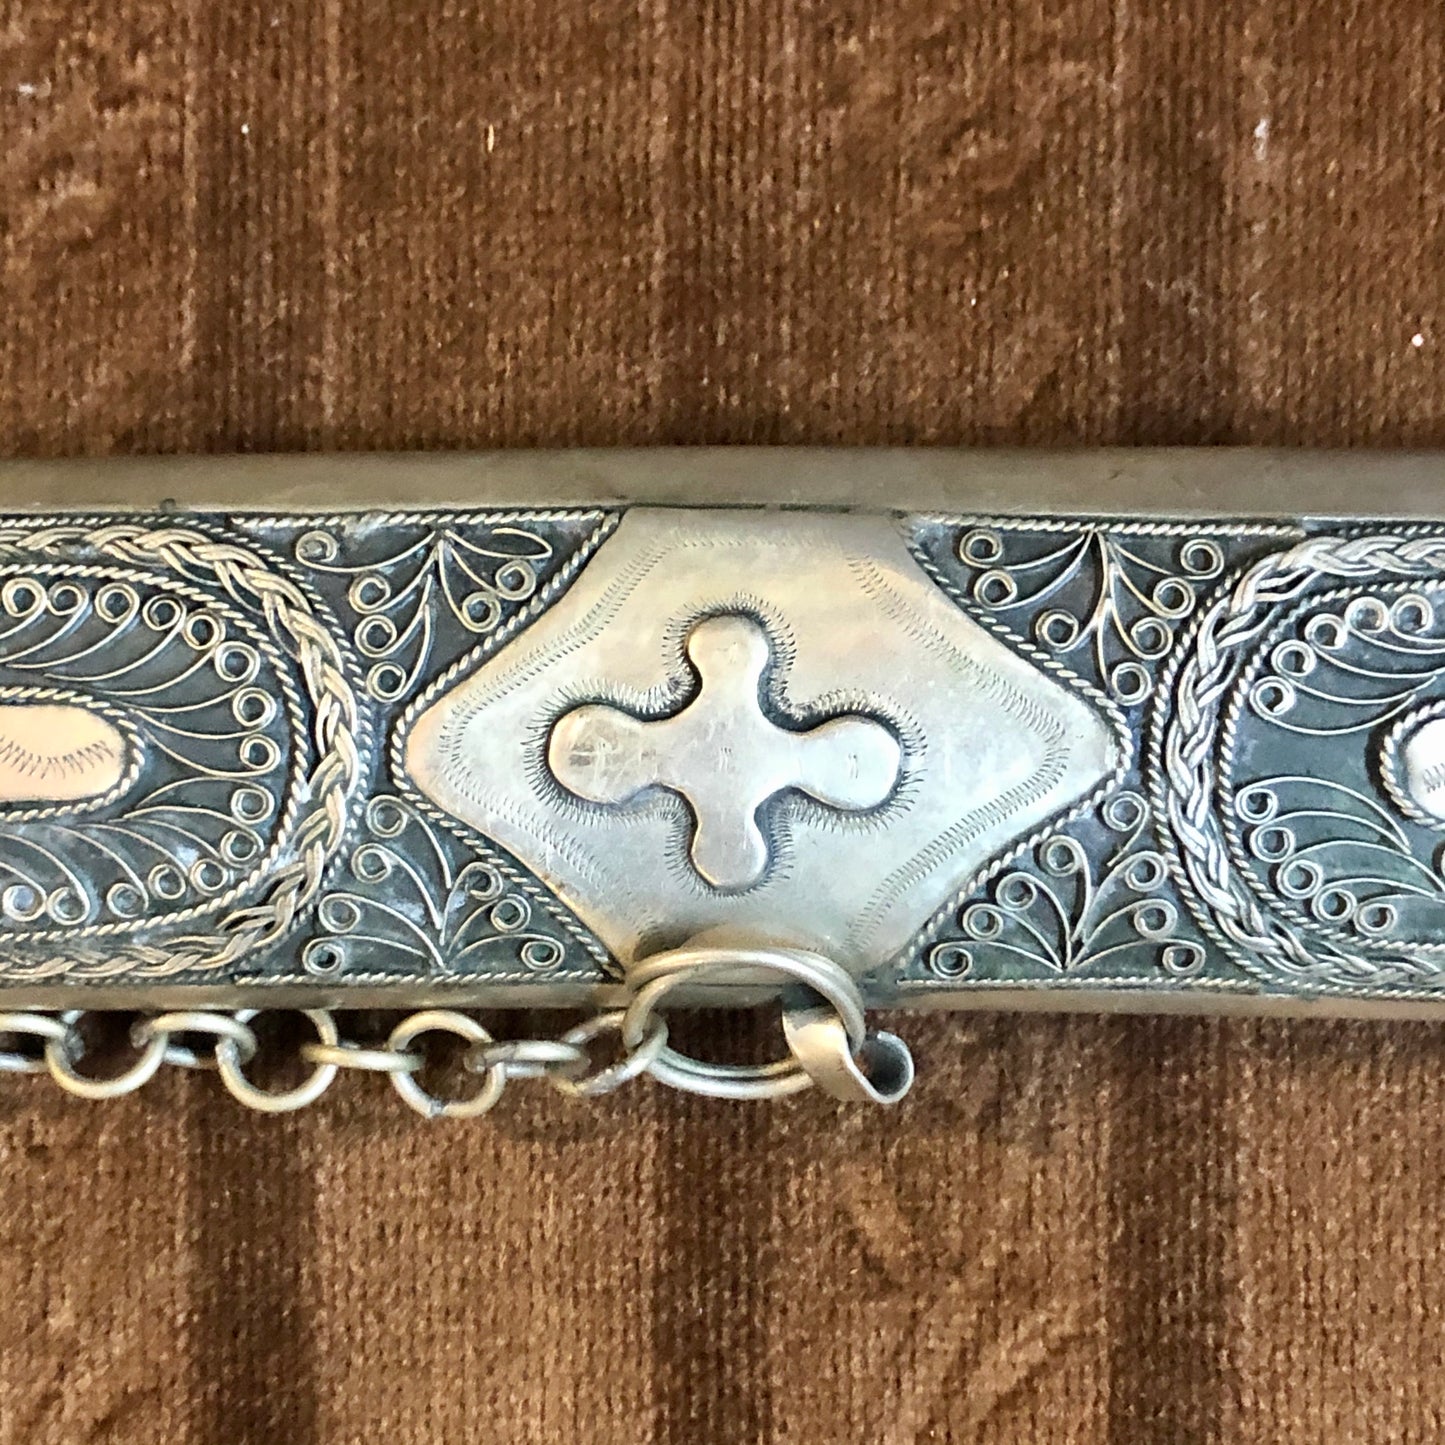 Silver Sword with Cross signs. 80 years old.